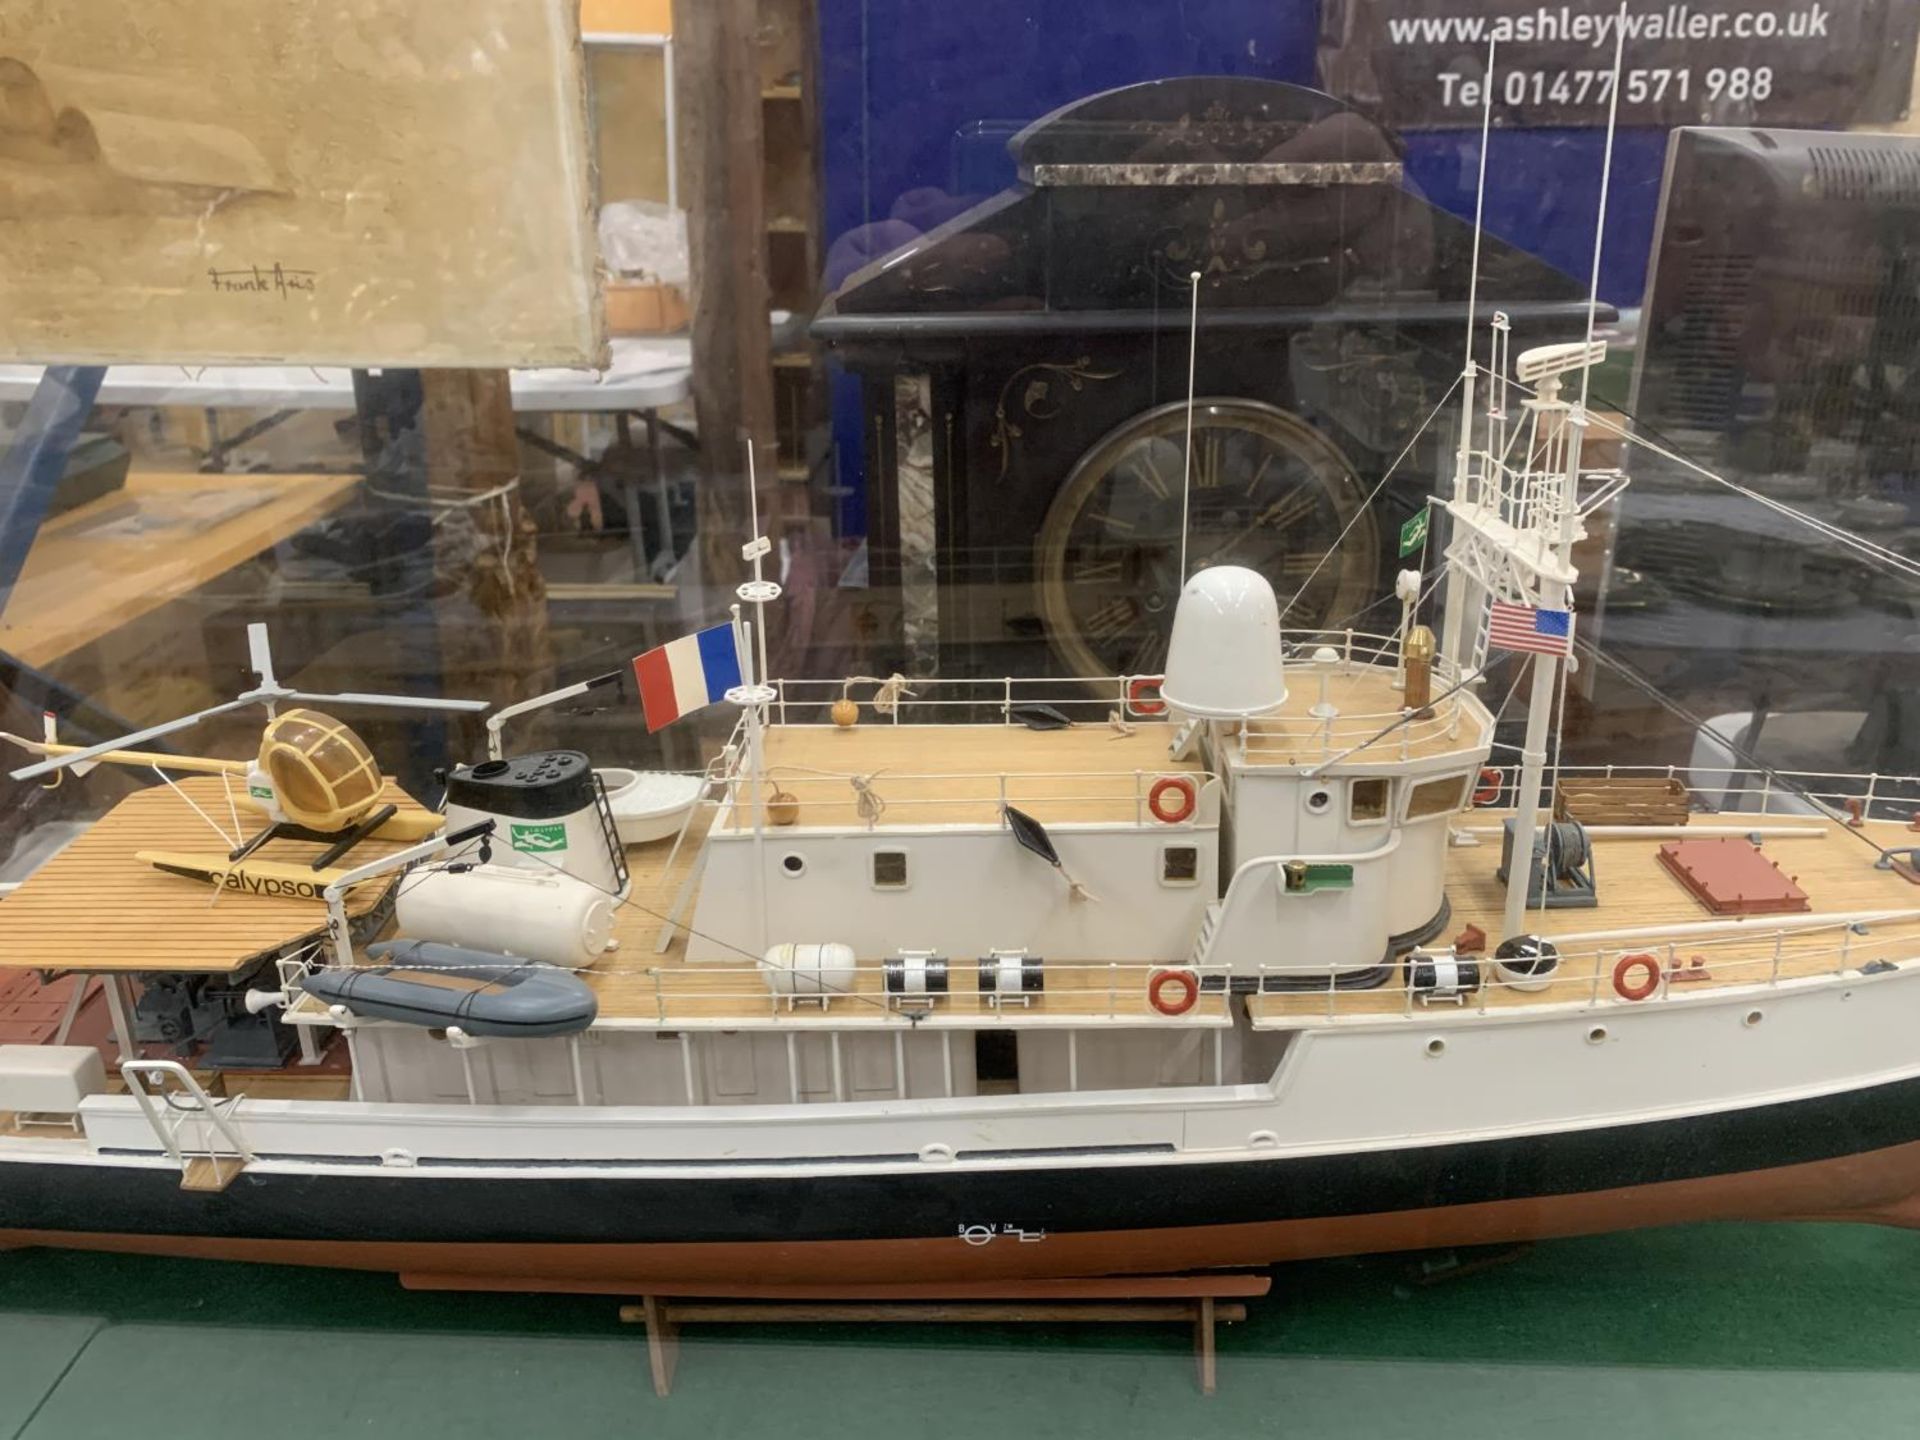 A LARGE MODEL OF A BOAT WITH HELICOPTER IN A GLASS CASE - Bild 3 aus 5